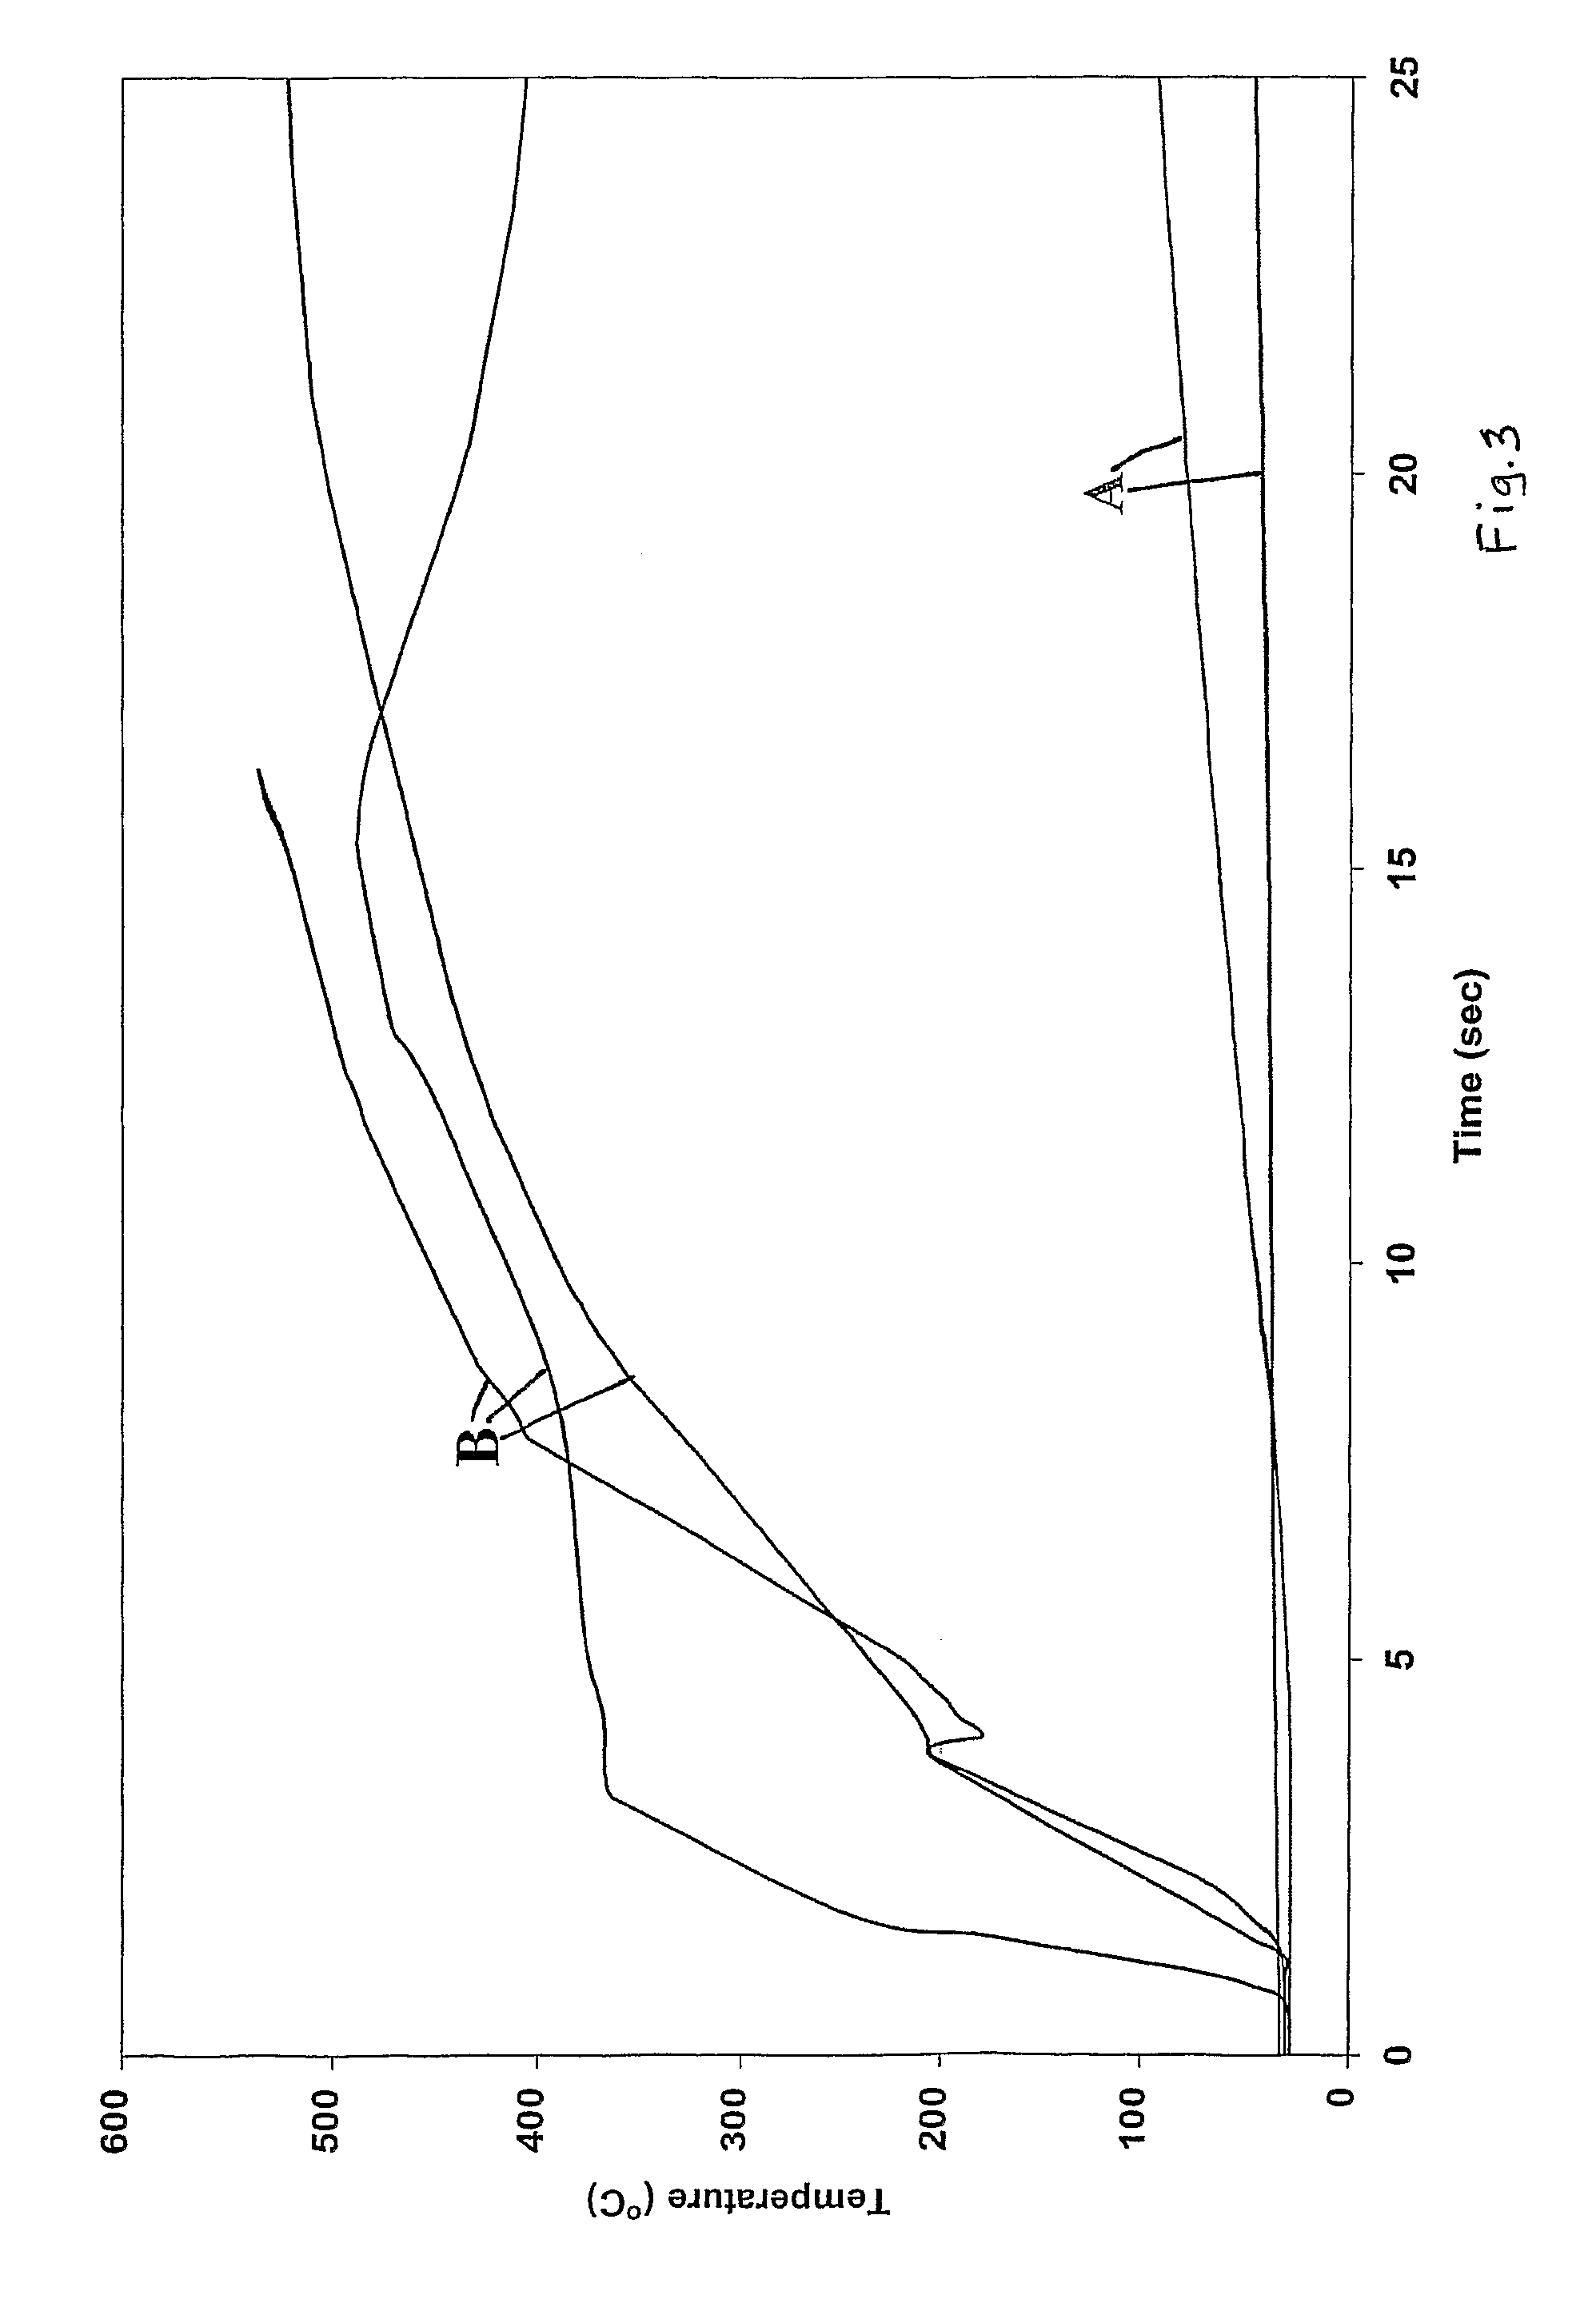 Battery separator with Z-direction stability